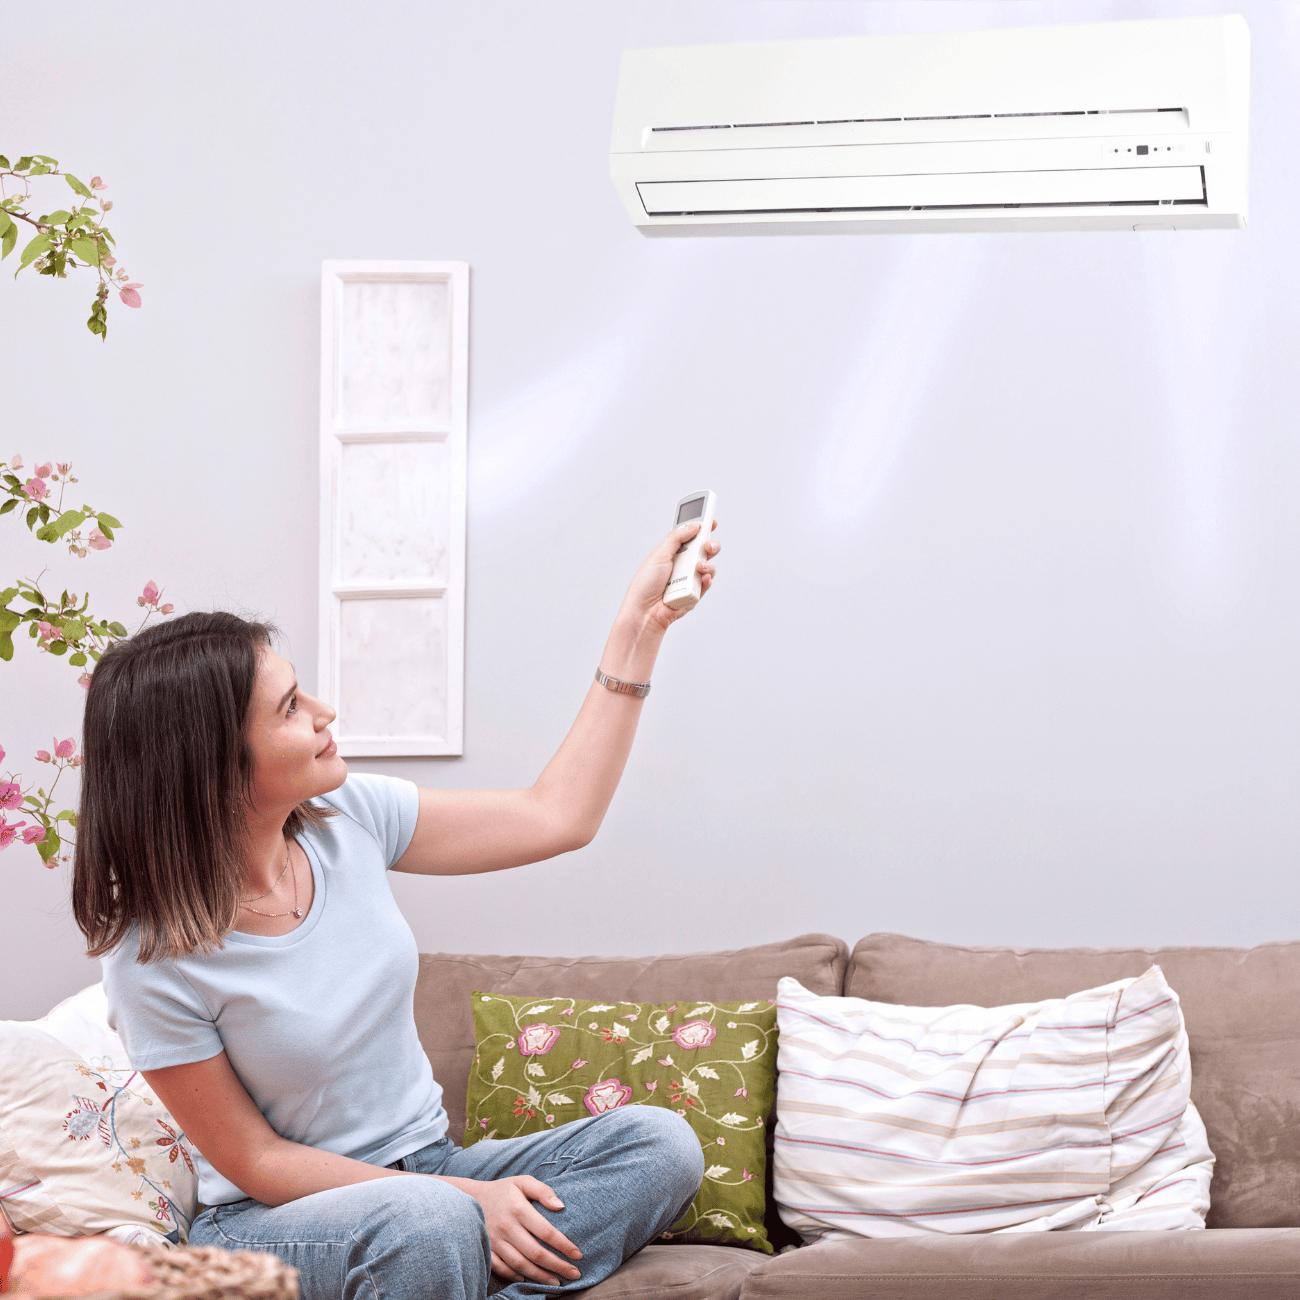 Woman using an air conditioner